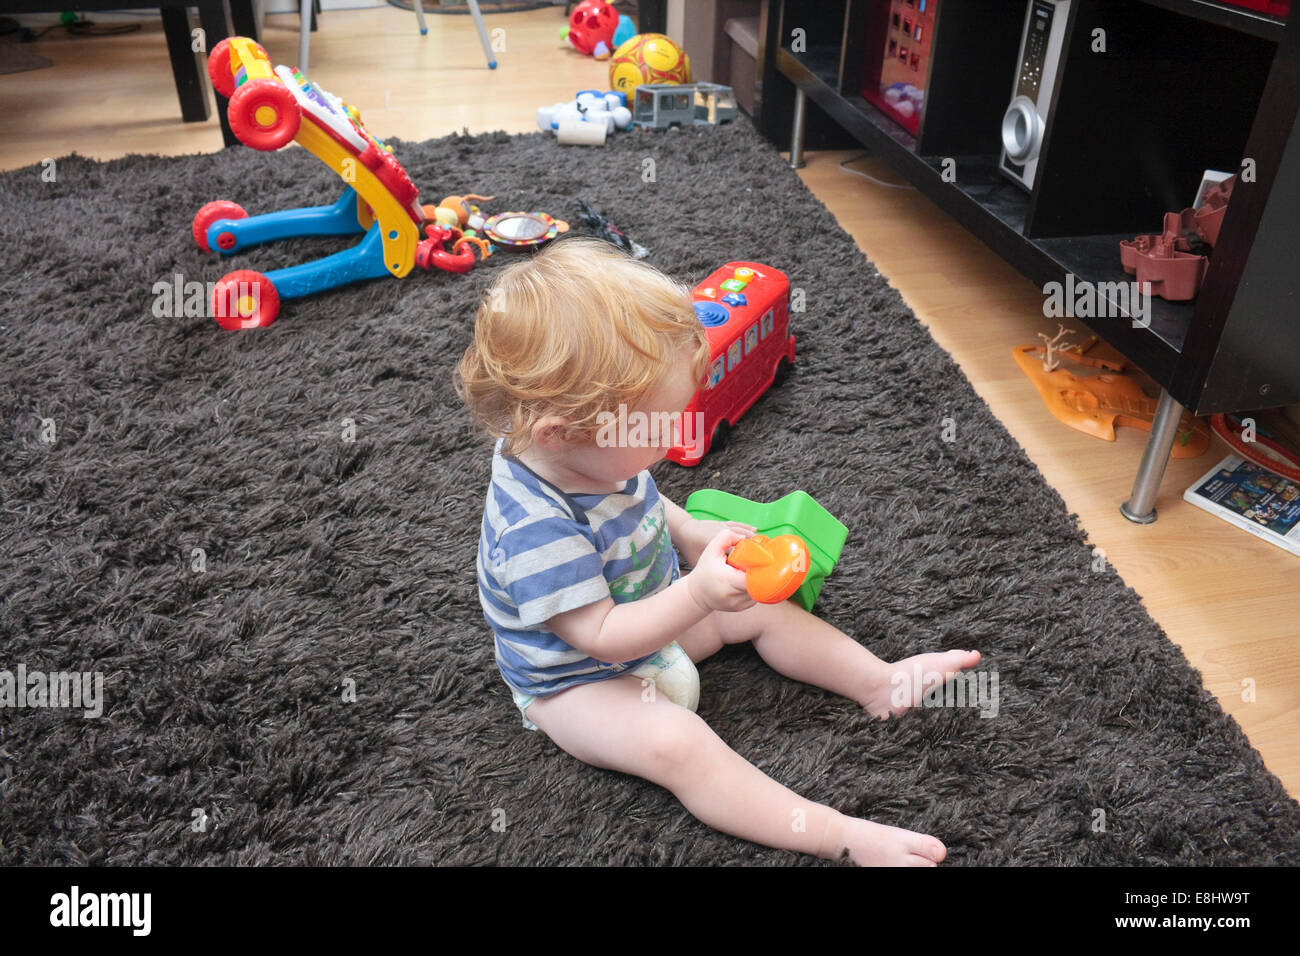 A one-year old boy playing with toys on a carpet in a living room setting Stock Photo